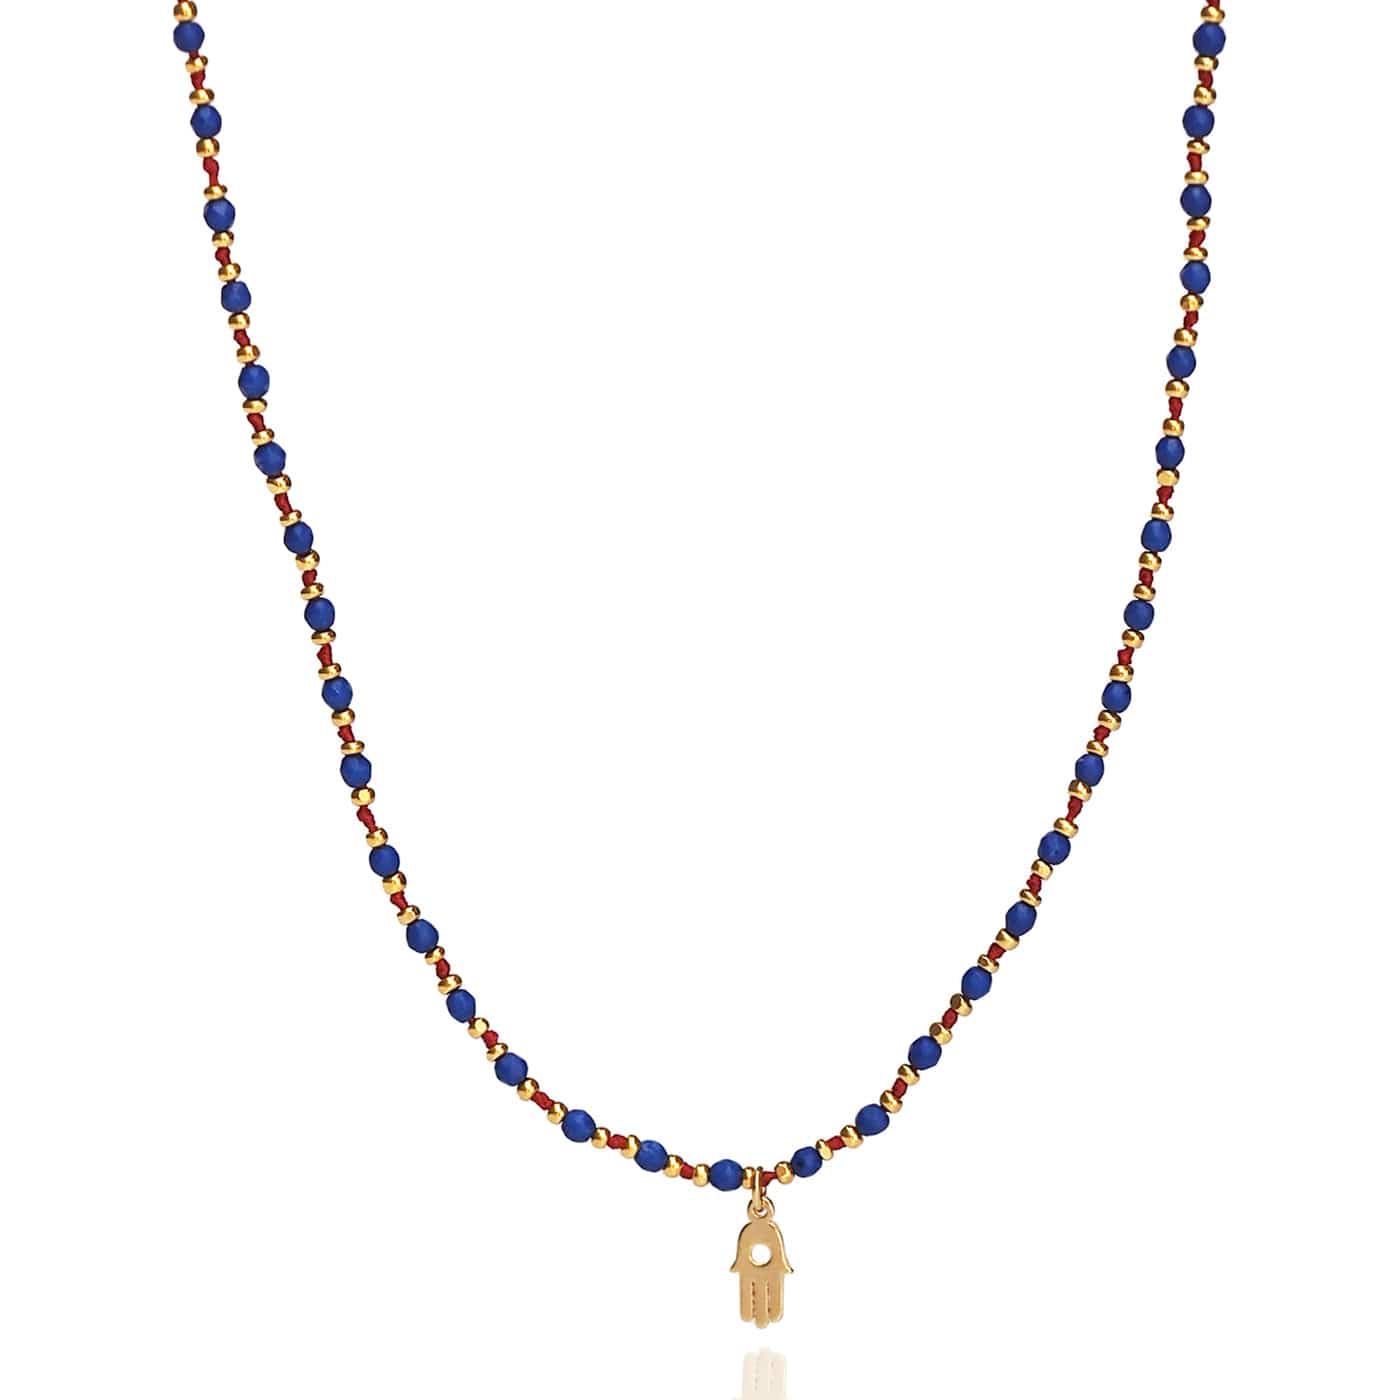 TAI JEWELRY Necklace Lapis Handmade Beaded Necklace With Dangle Accent